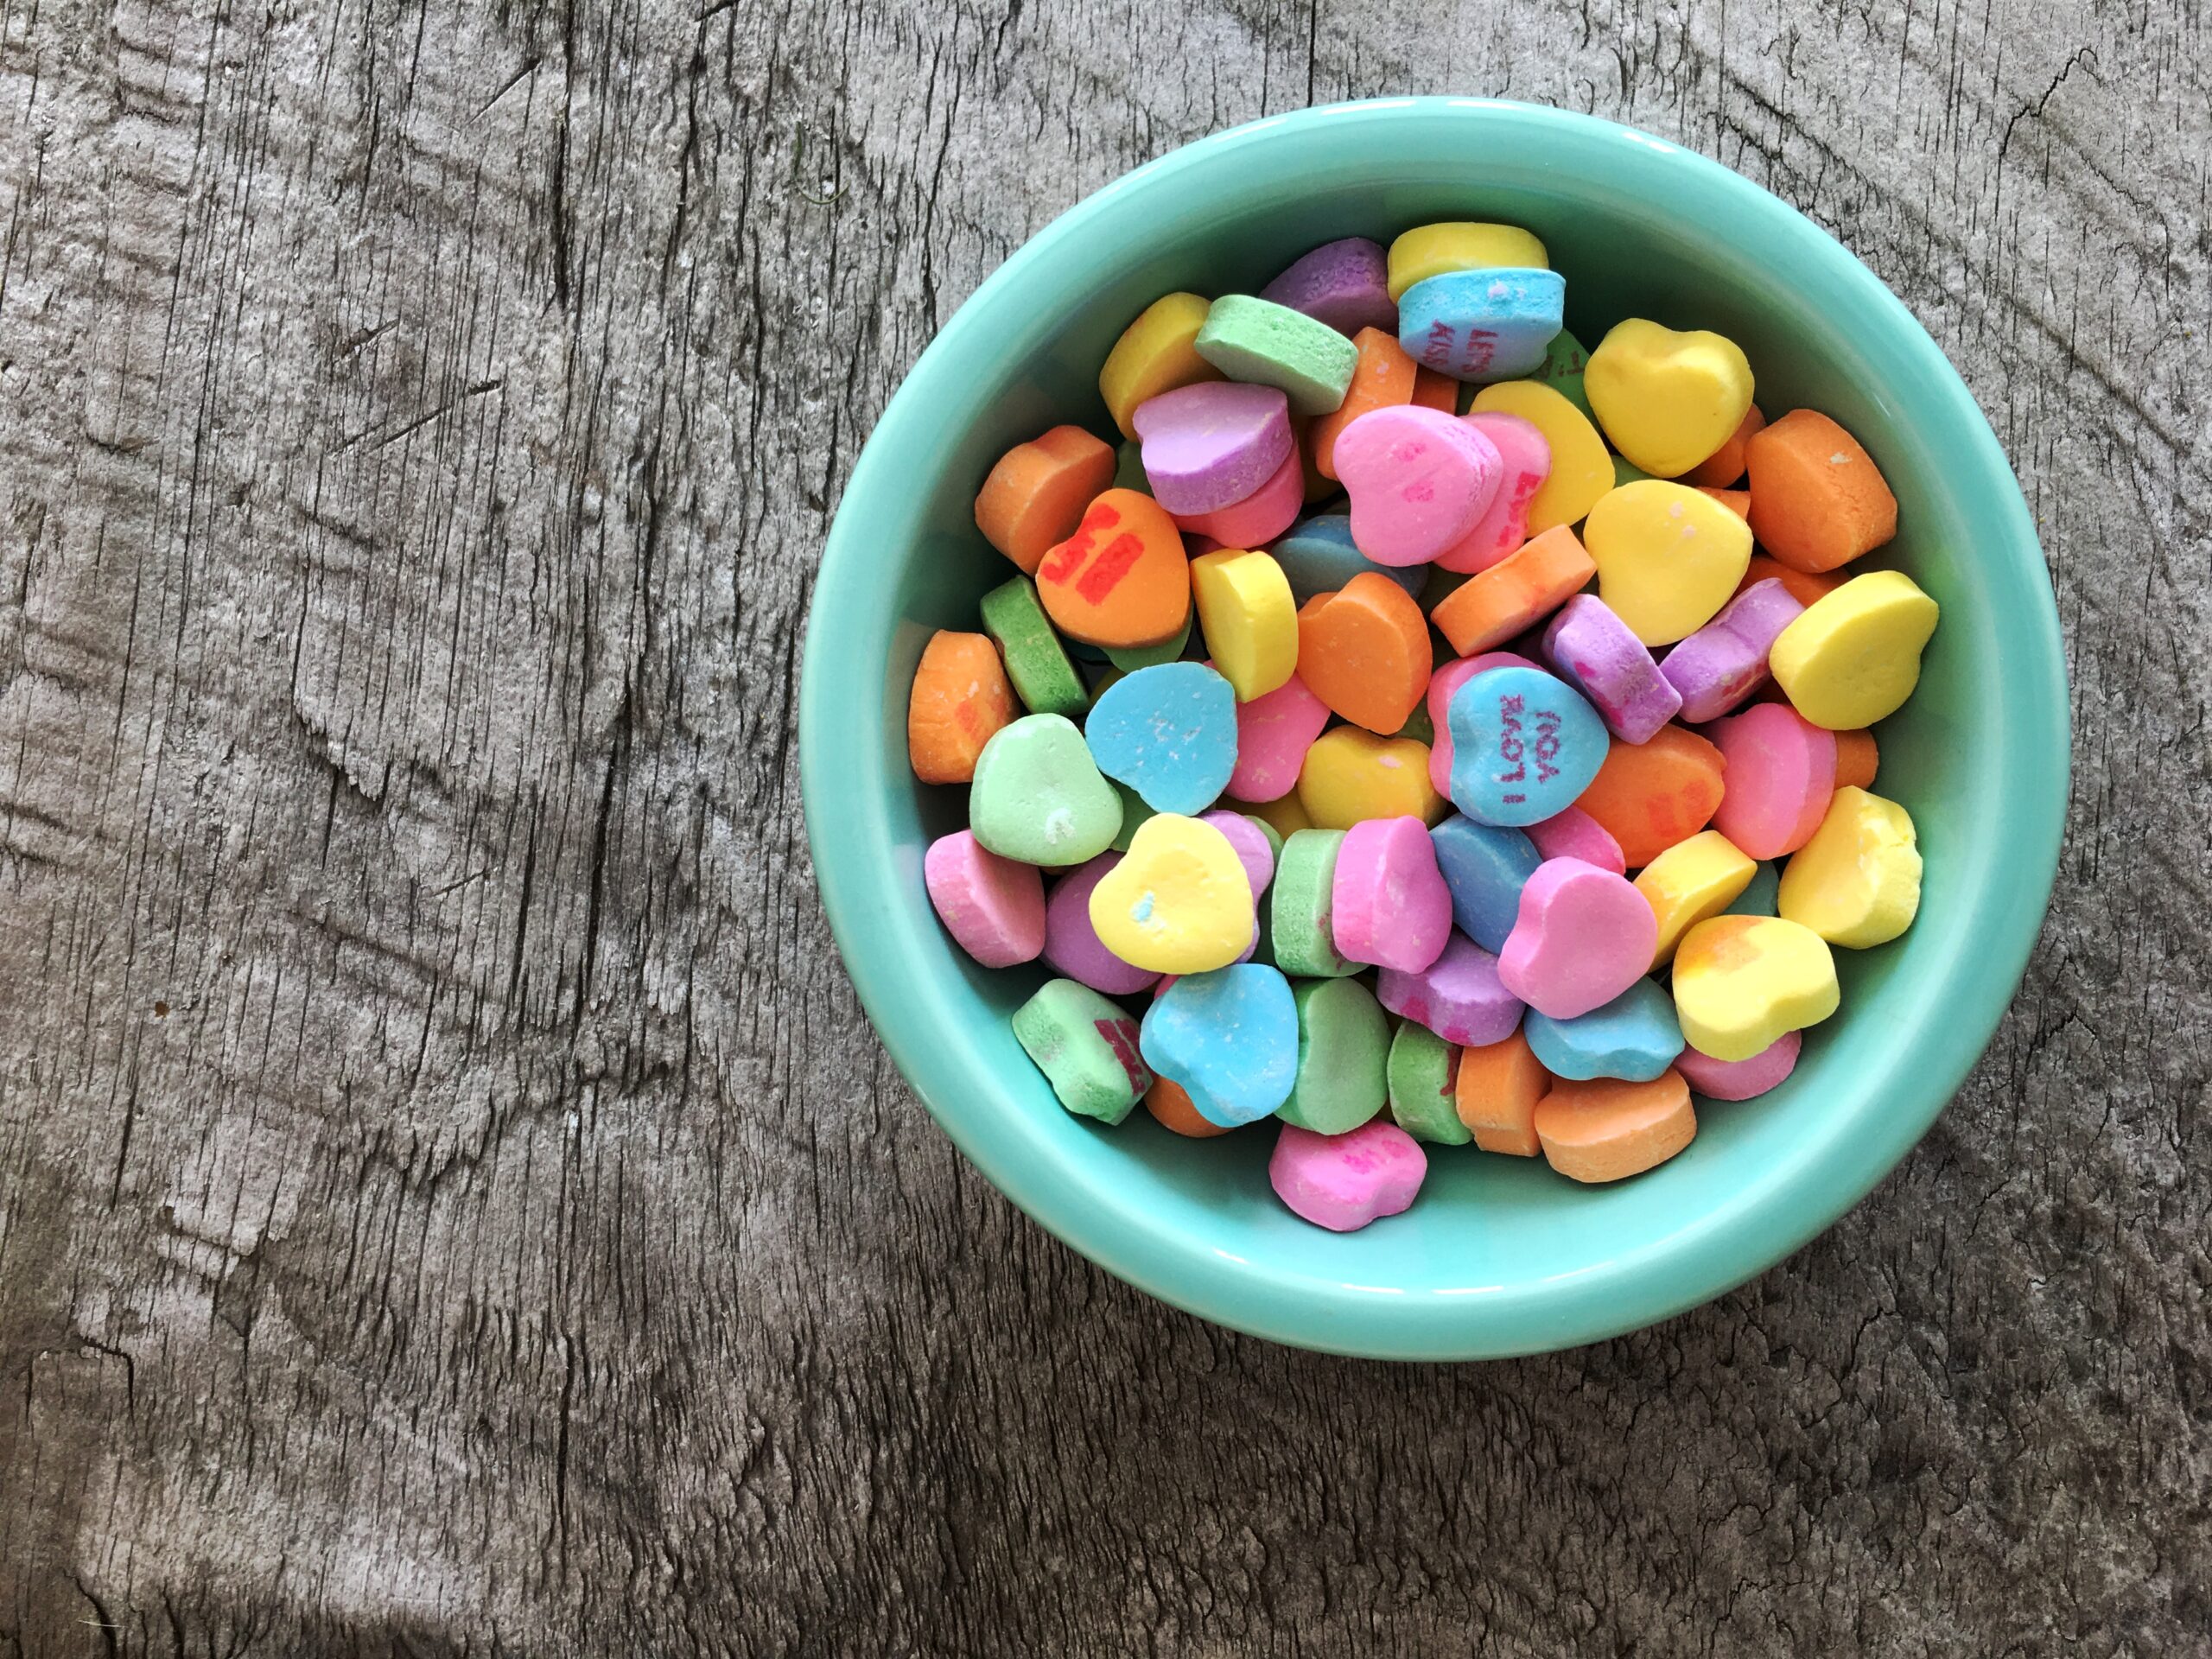 Candy hearts in a turquoise bowl